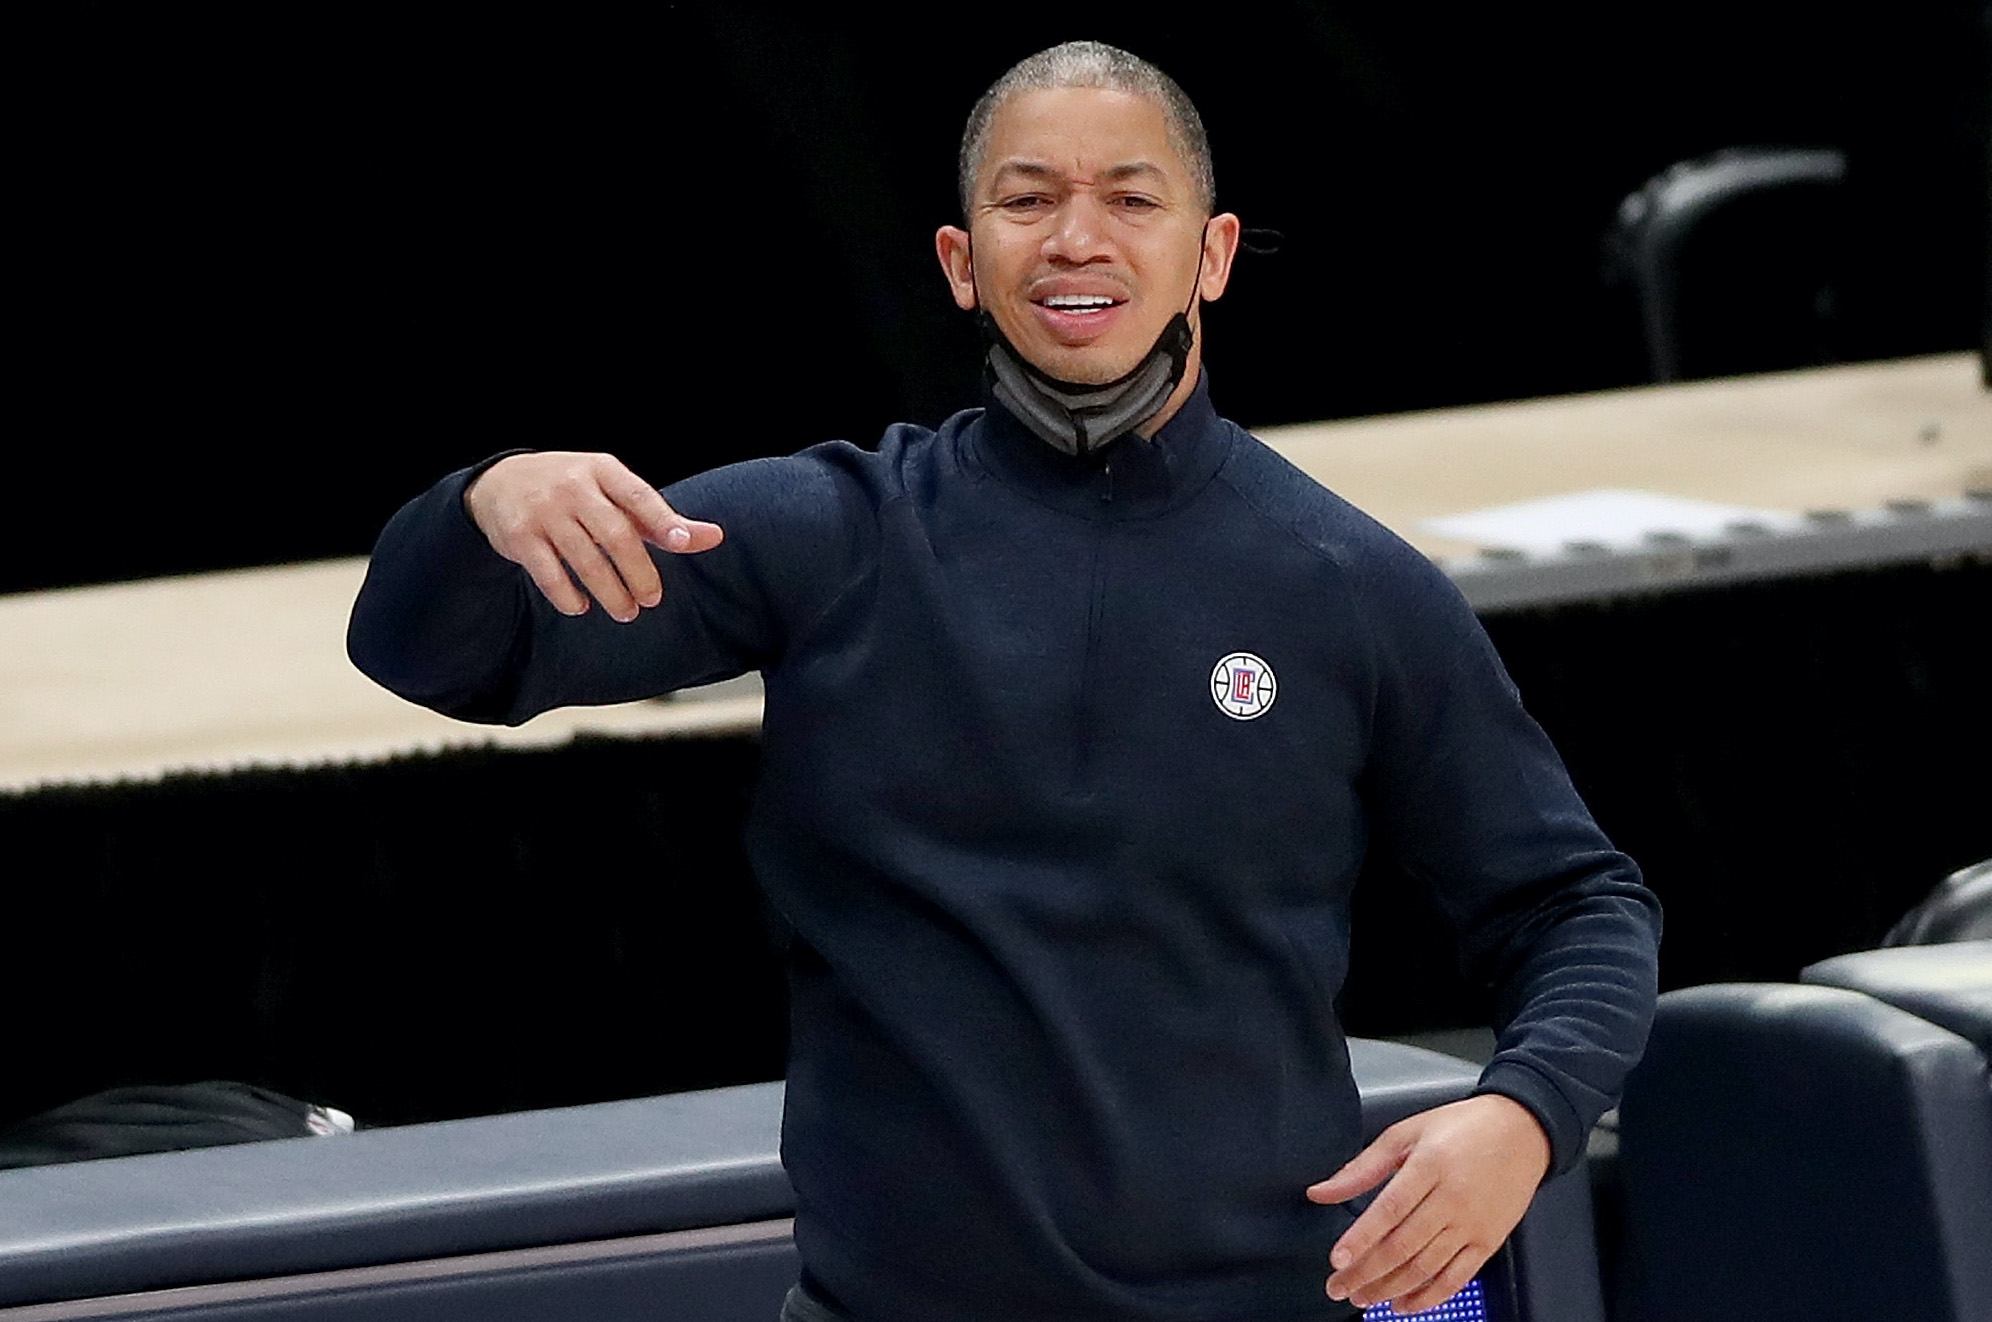 Clippers head coach Tyronn Lue looks confused and distressed.